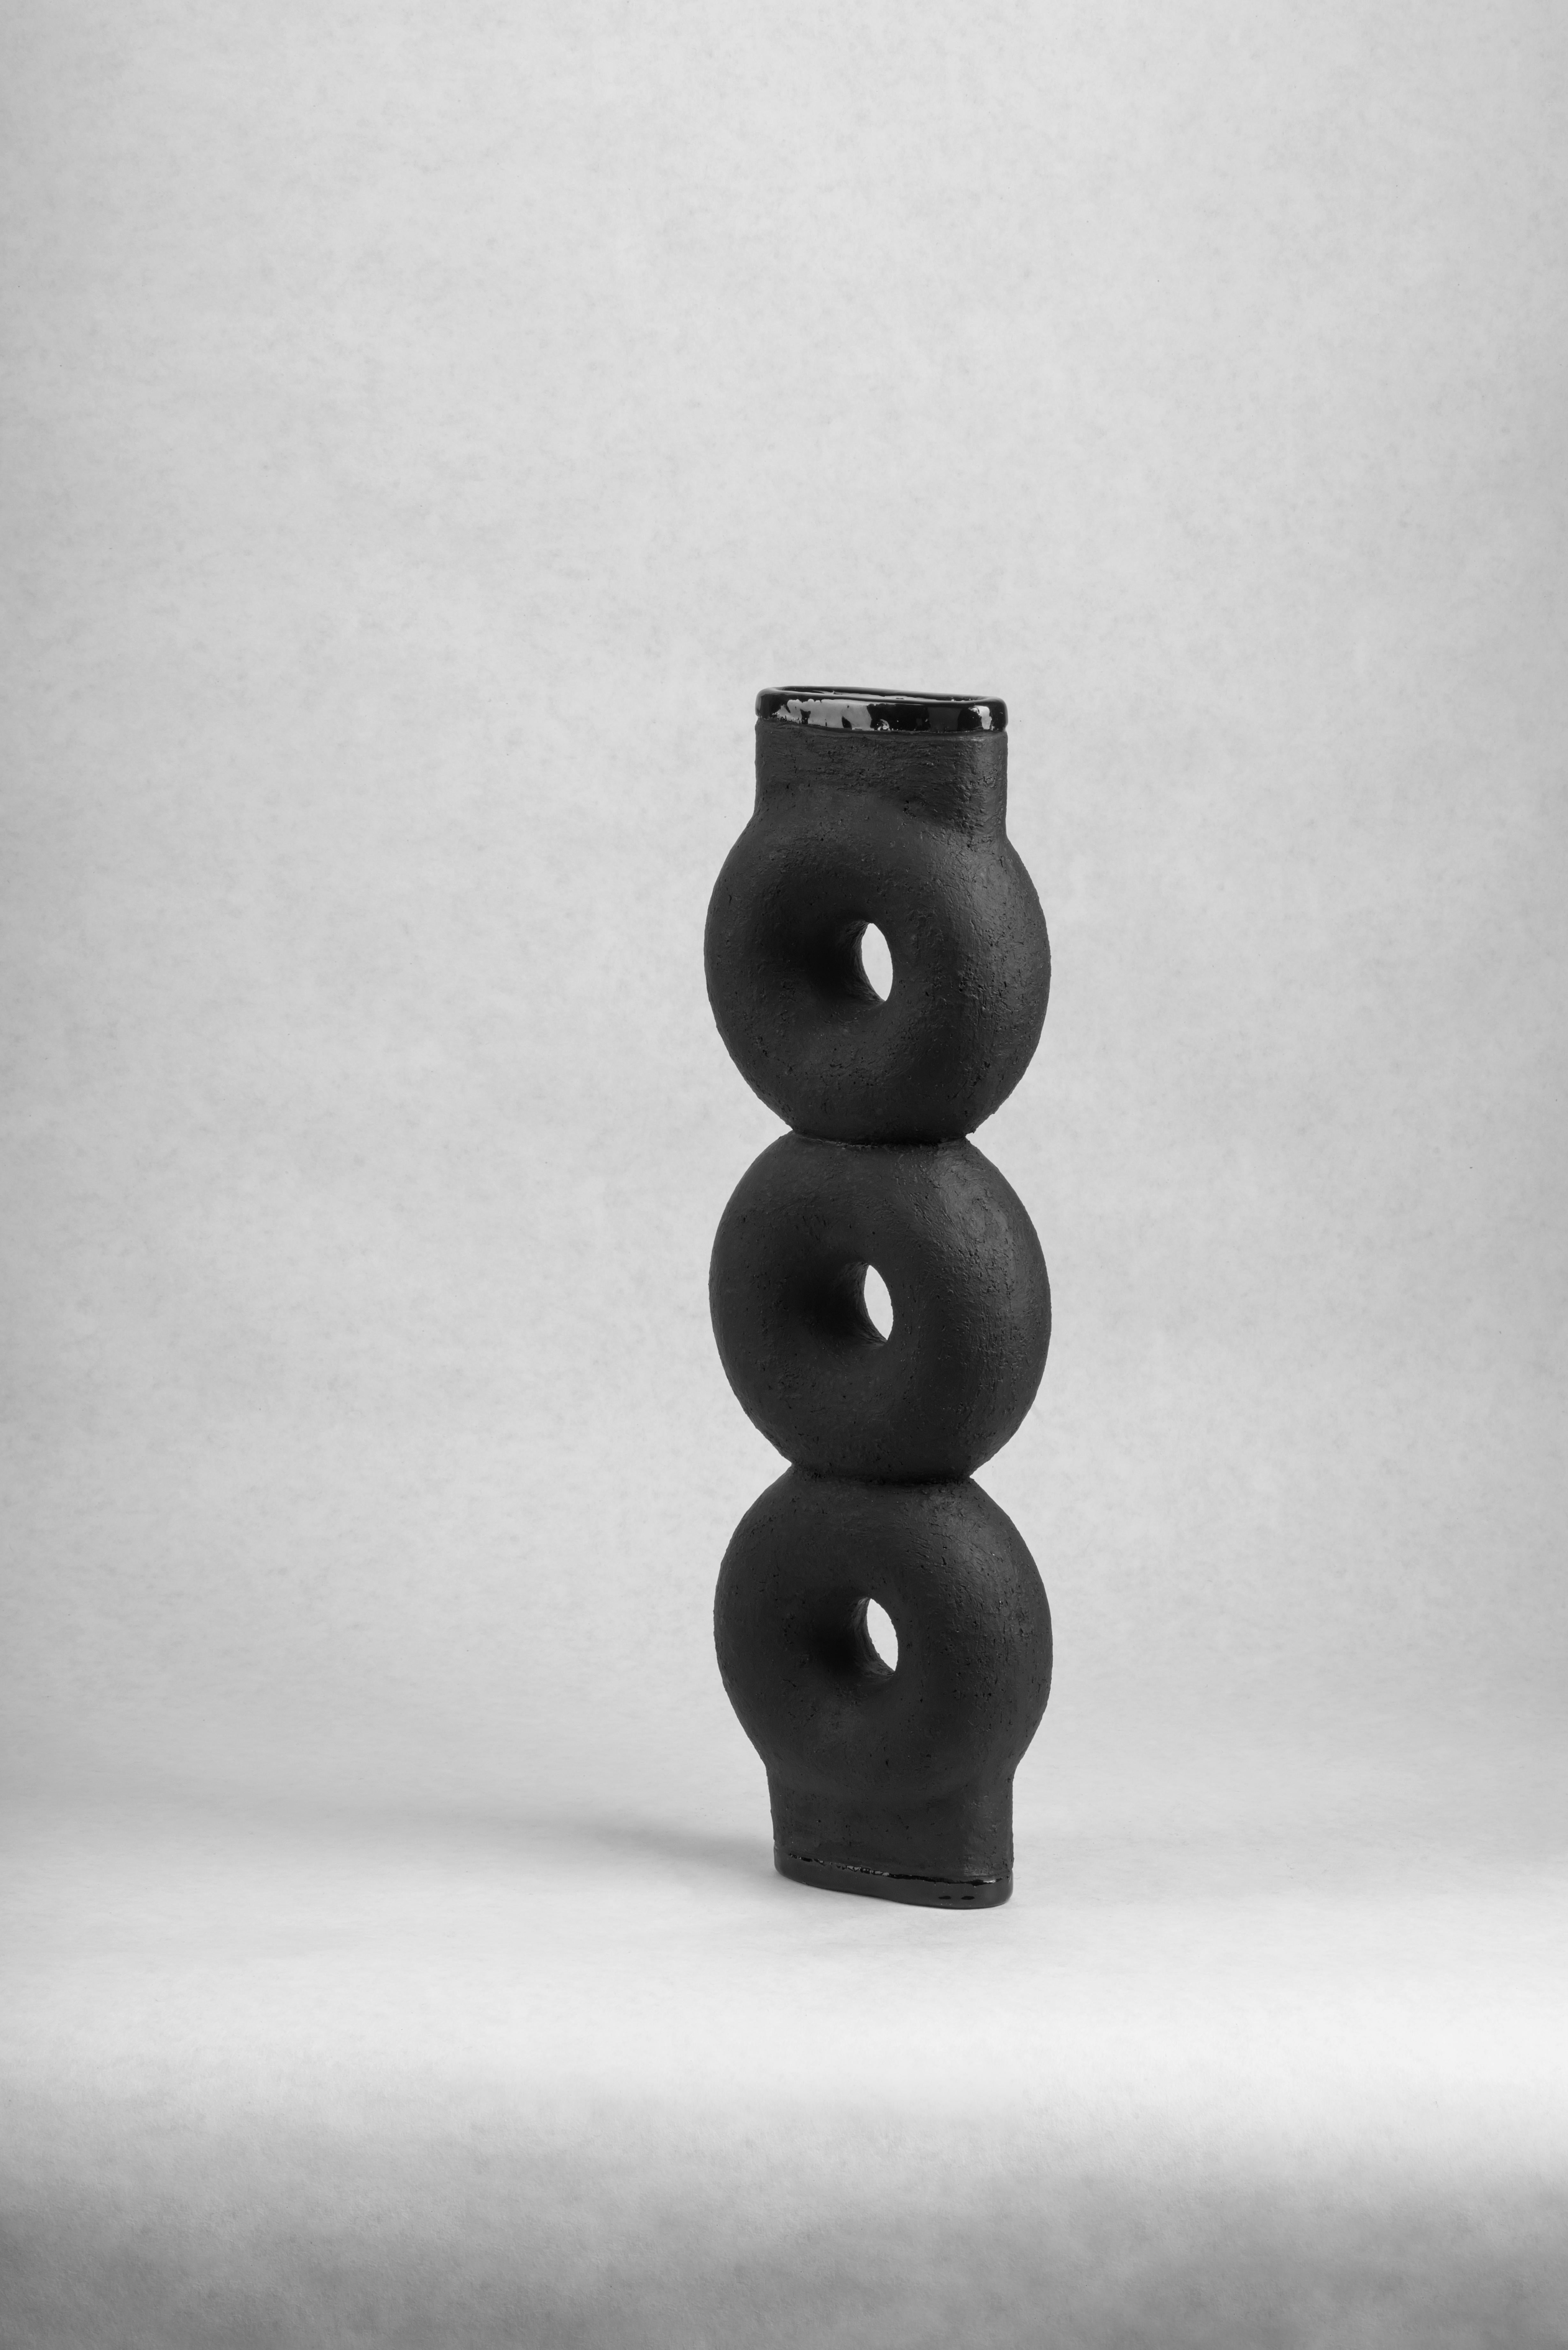 Sculpted ceramic vase by FAINA
Design: Victoriya Yakusha
Material: Material: clay / ceramics
Dimensions: 14 x 5 x H 43.5 cm


The vase is part of a series of 5 vases, the set of vases consists of :

1. Vase on three legs height 500 x width 200 x